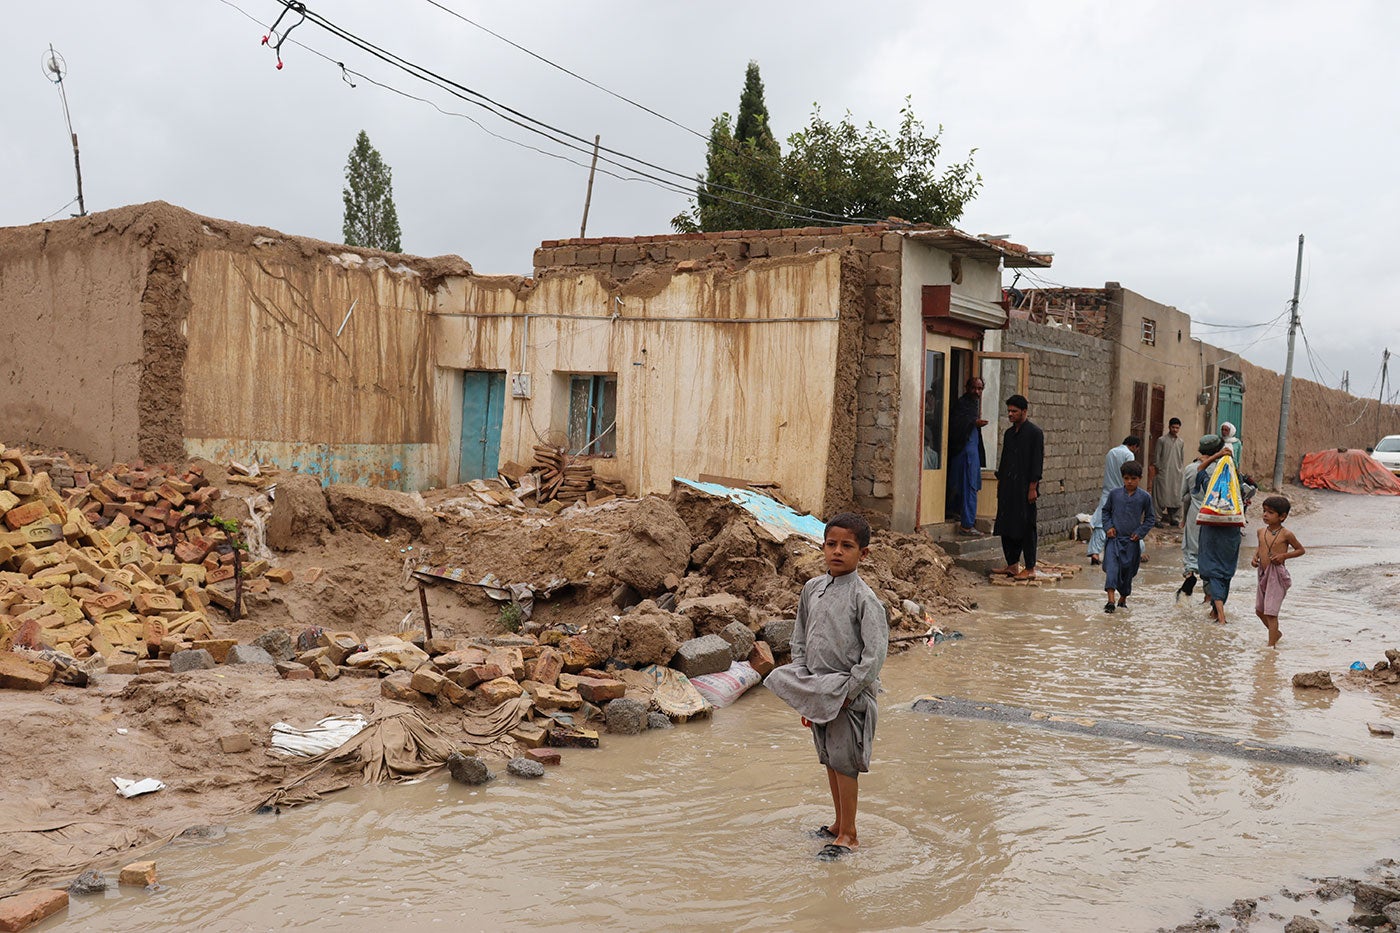 A boy walks through a flooded dirt path alongside some rubble. Behind him, a few adults and children walk together.